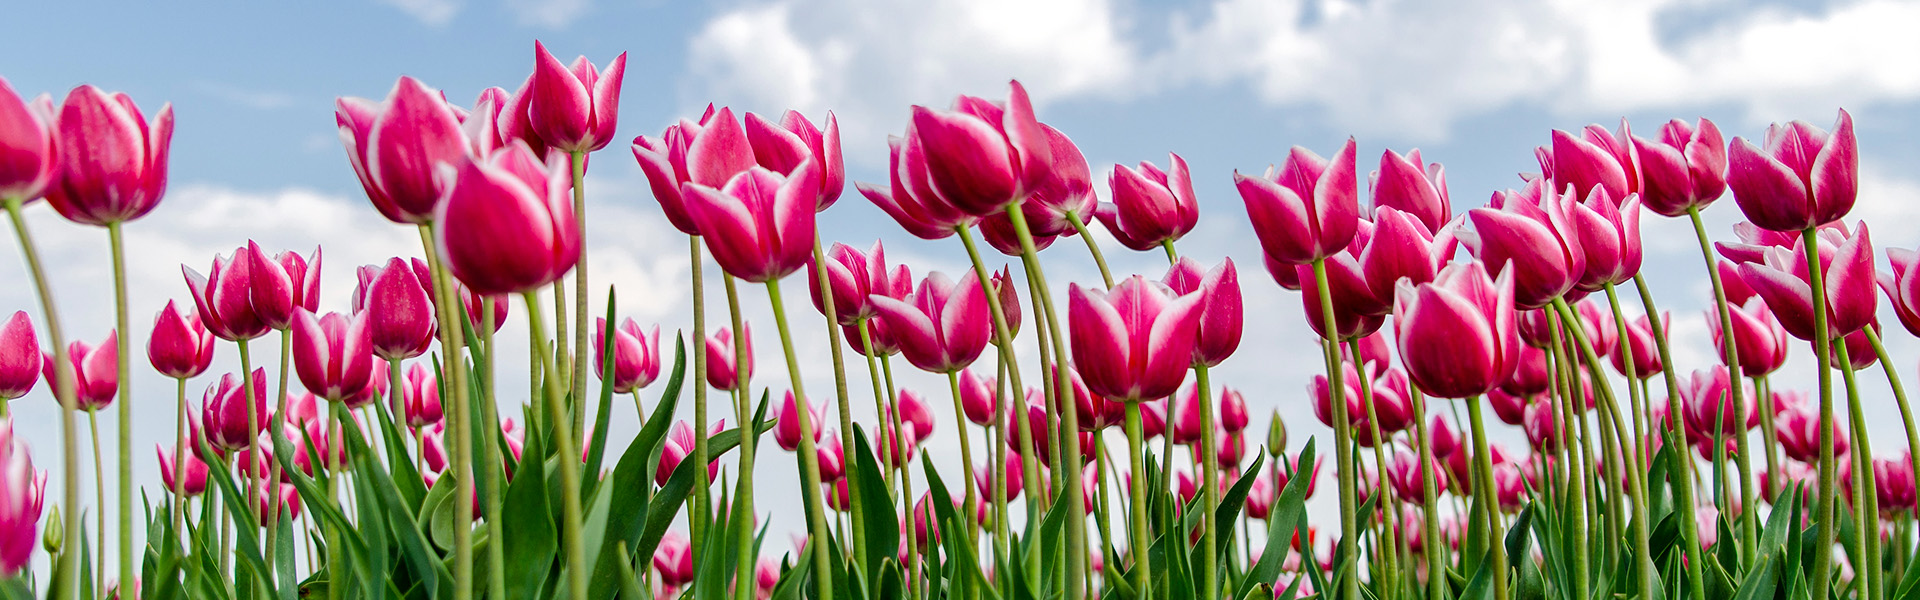 Beautiful pink tulips in a field with blue skies with scattered, fluffy clouds